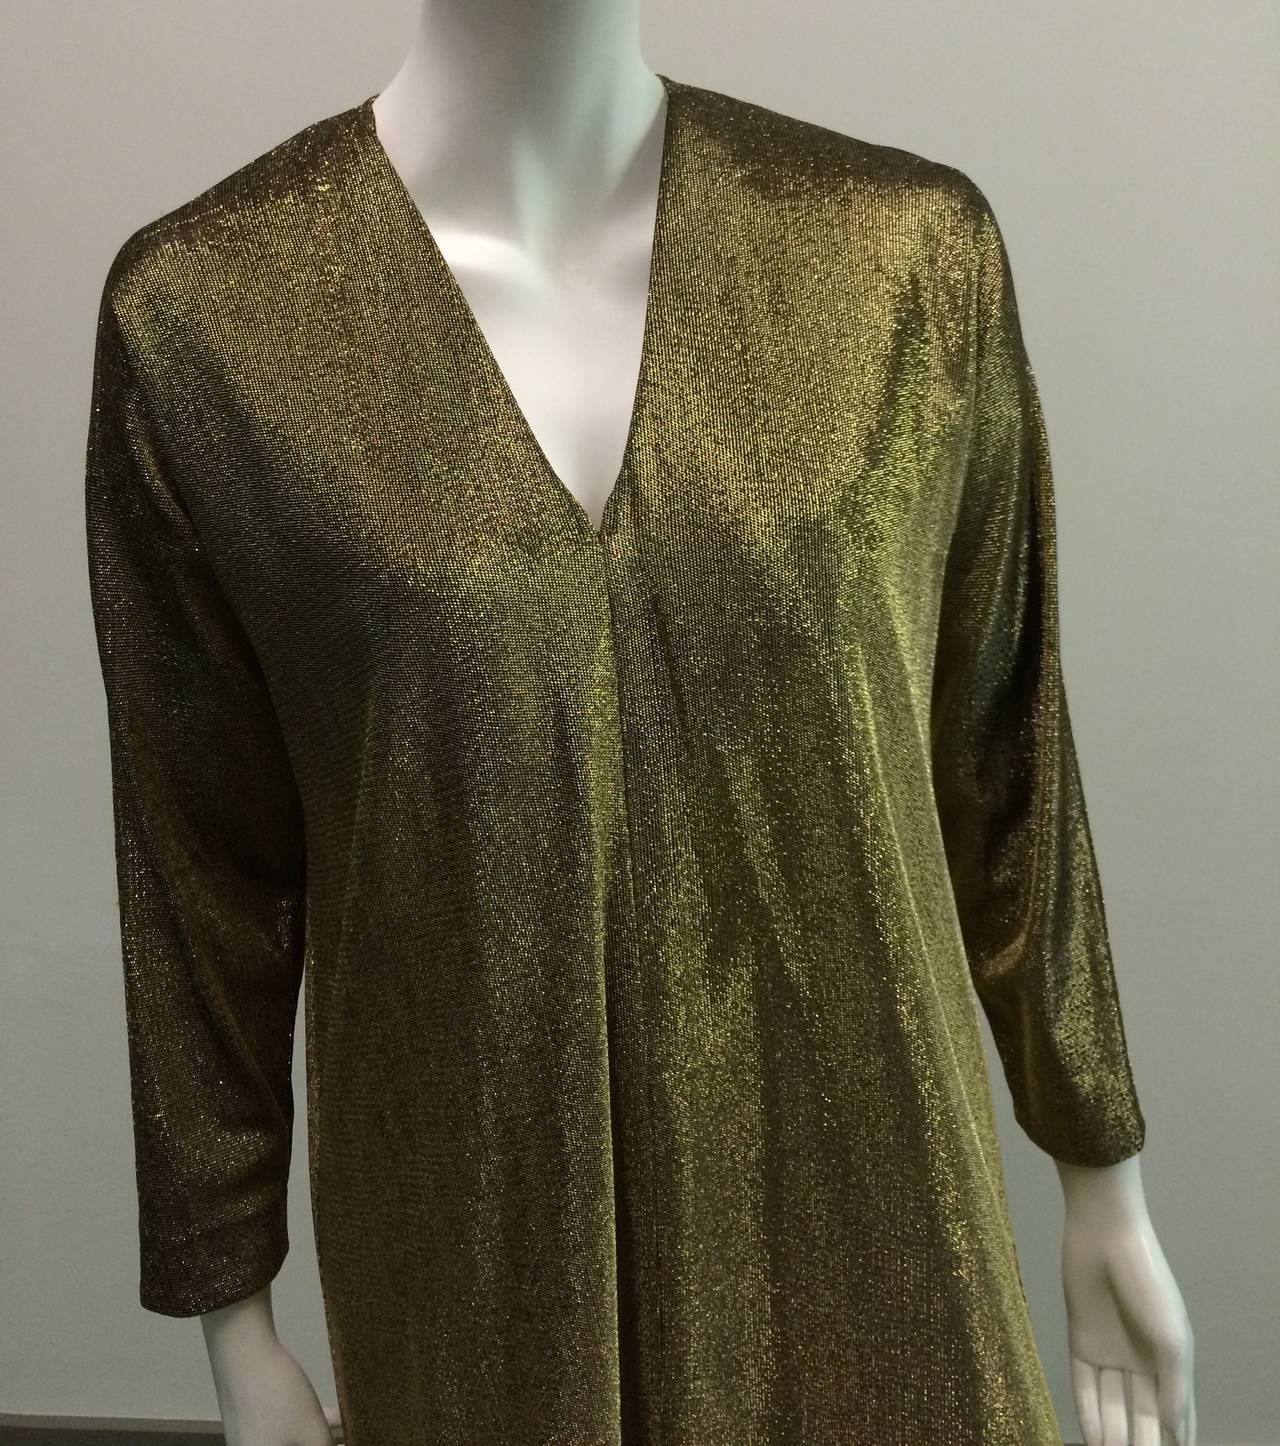 Halston IV for I.Magnin 1970s gold metallic caftan. This gold caftan is what you would have seen Elizabeth Taylor wear while partying in the south of France. It is a one size fits all but please see measurements. Besides being stunning it is a